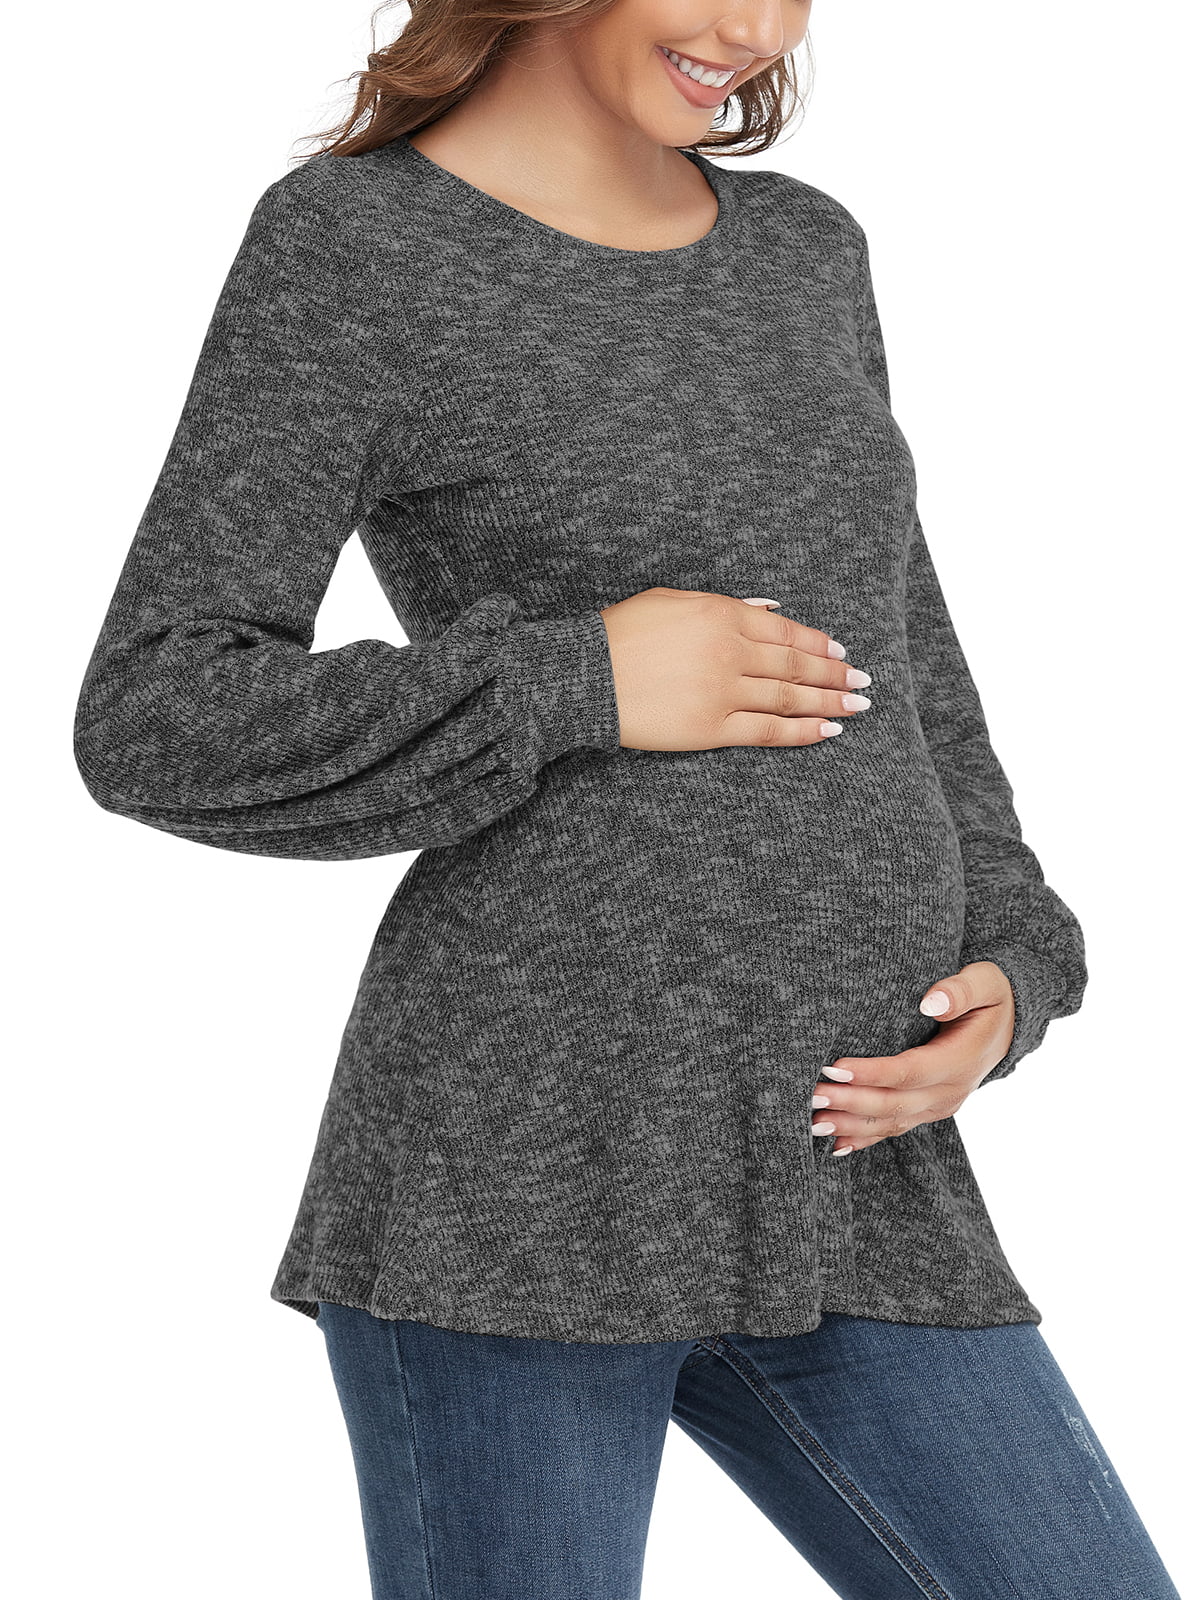 BBHoping Women's Maternity Sweater Tops Long Bishop Sleeves Pregnant Tunics Long Sleeve Winter Pregnancy Peplum Top 